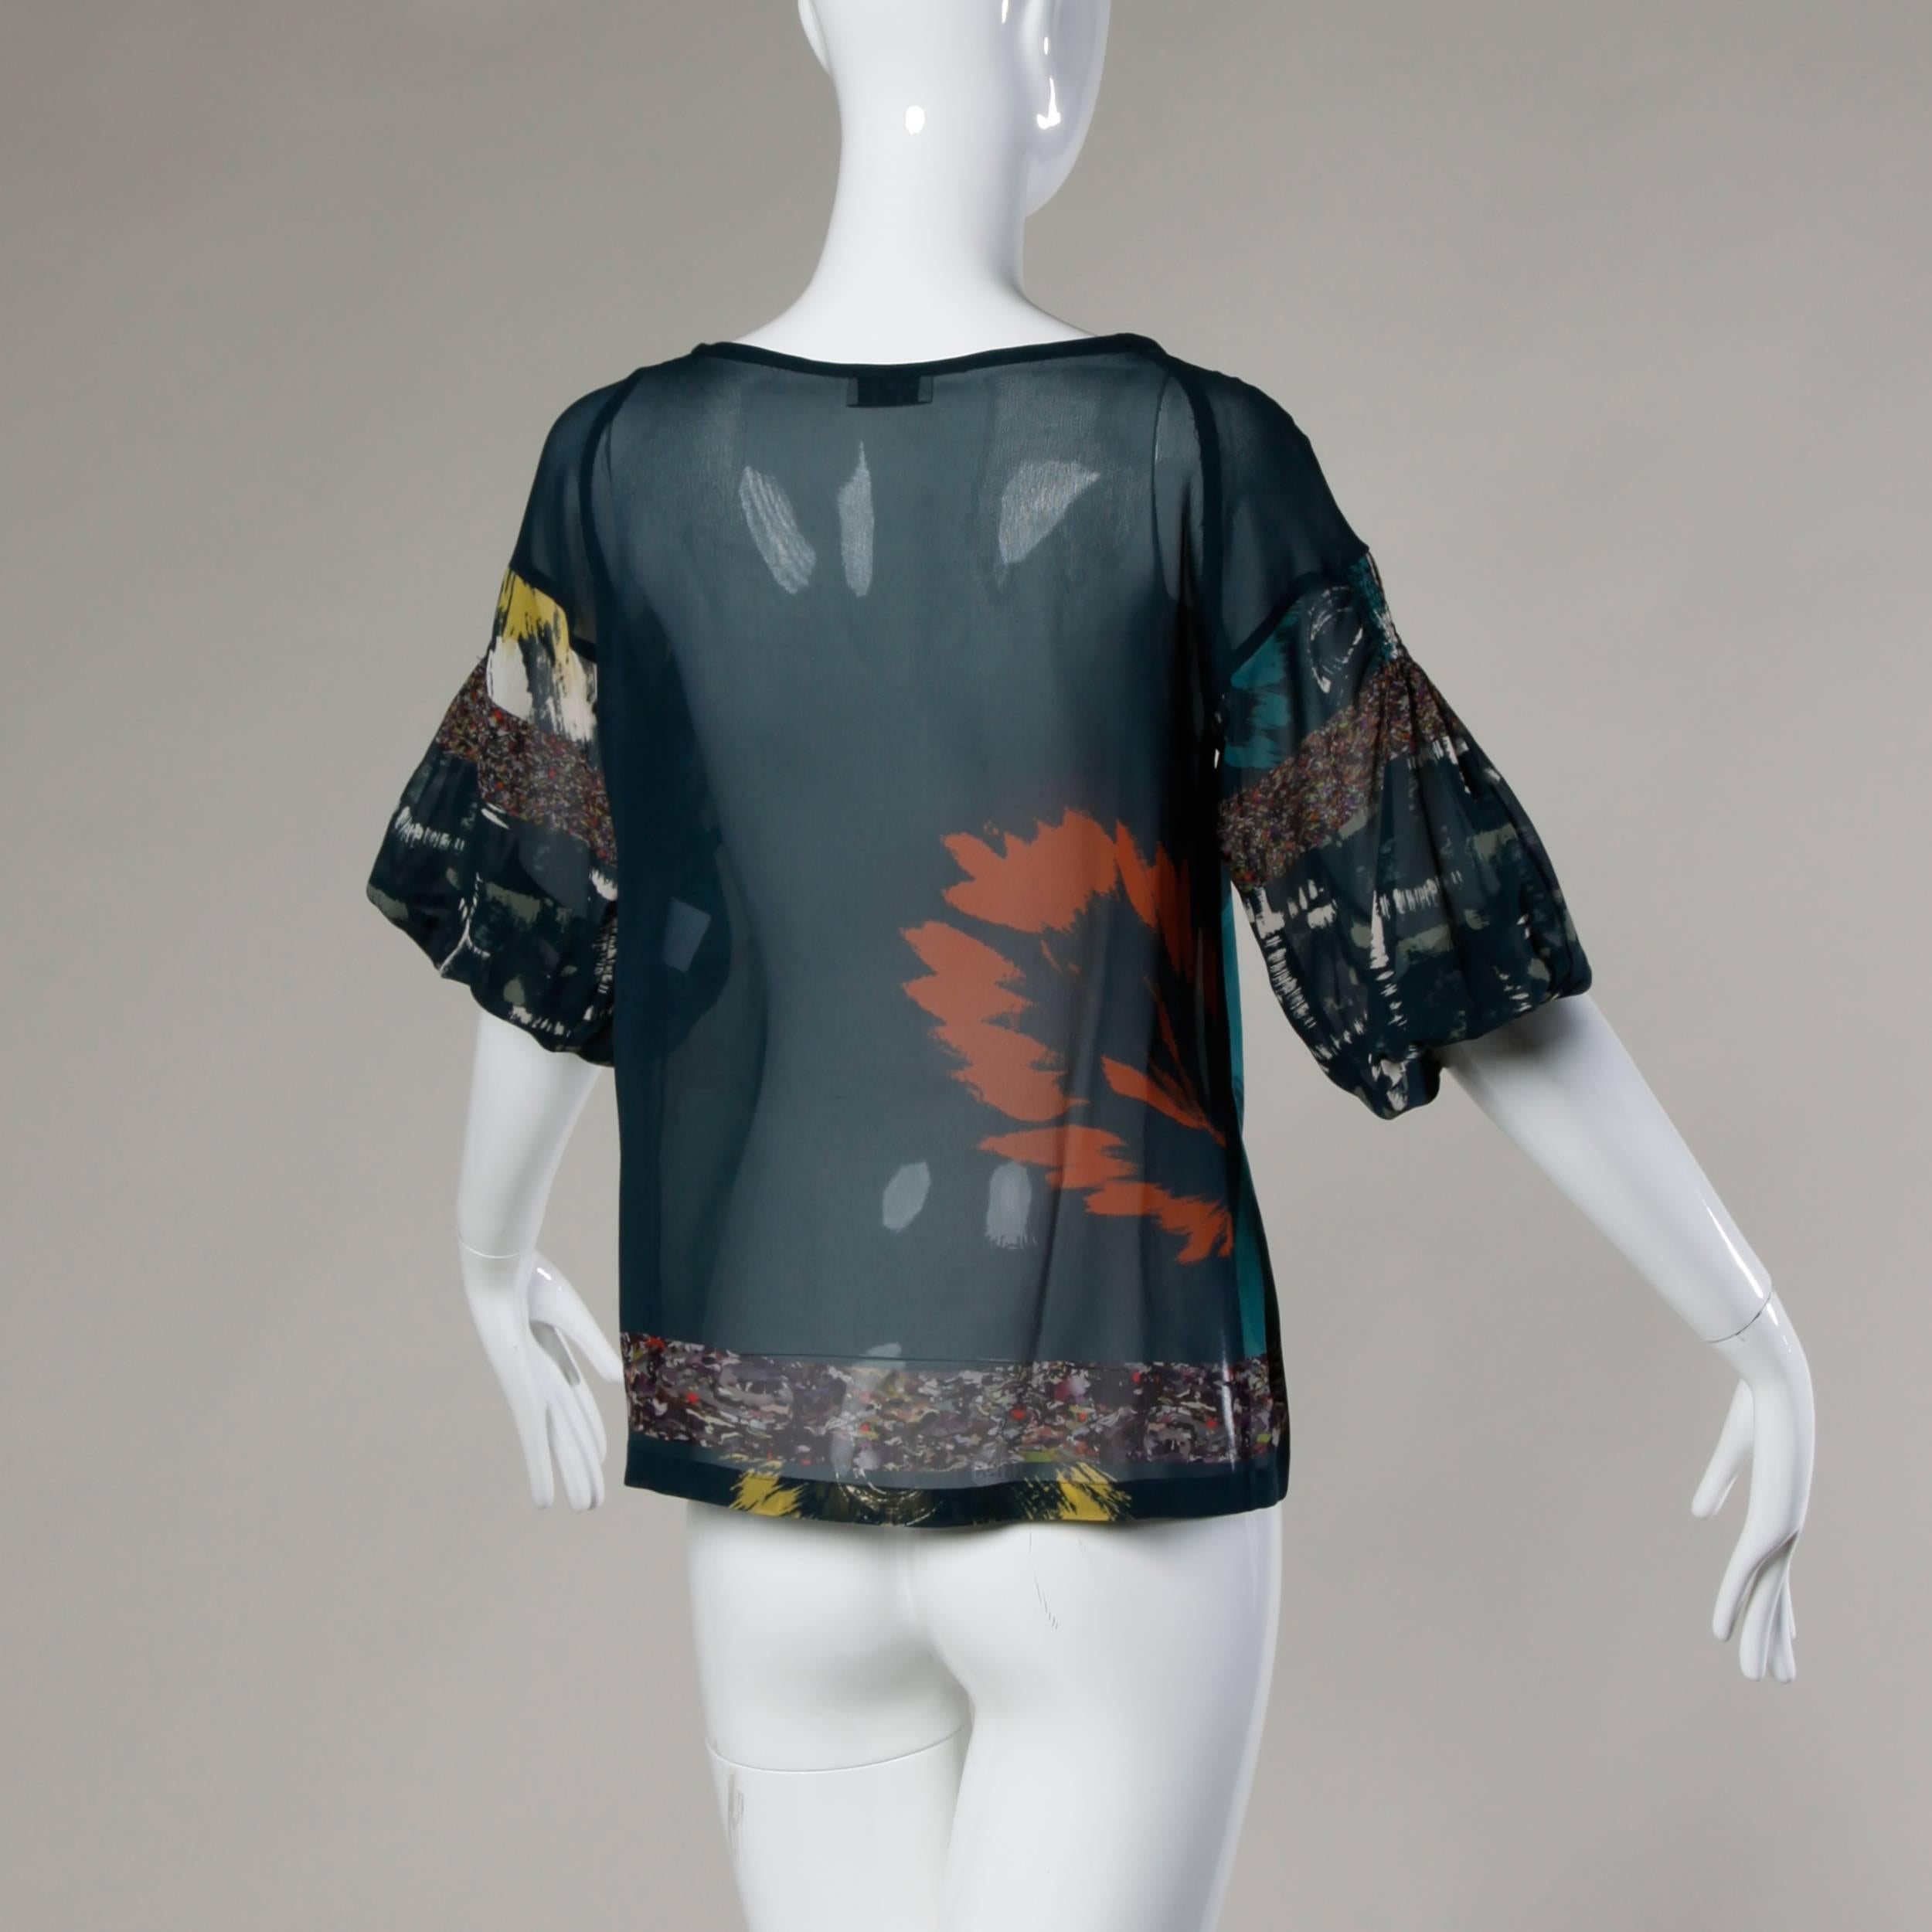 Gorgeous sheer printed top by Dries Van Noten in delicate silk.

Details:

Unlined
Marked Size: 38
Color: Dark Blue Multicolored 
Fabric: Silk
Label: Dries Van Noten

Measurements:

Bust: 36